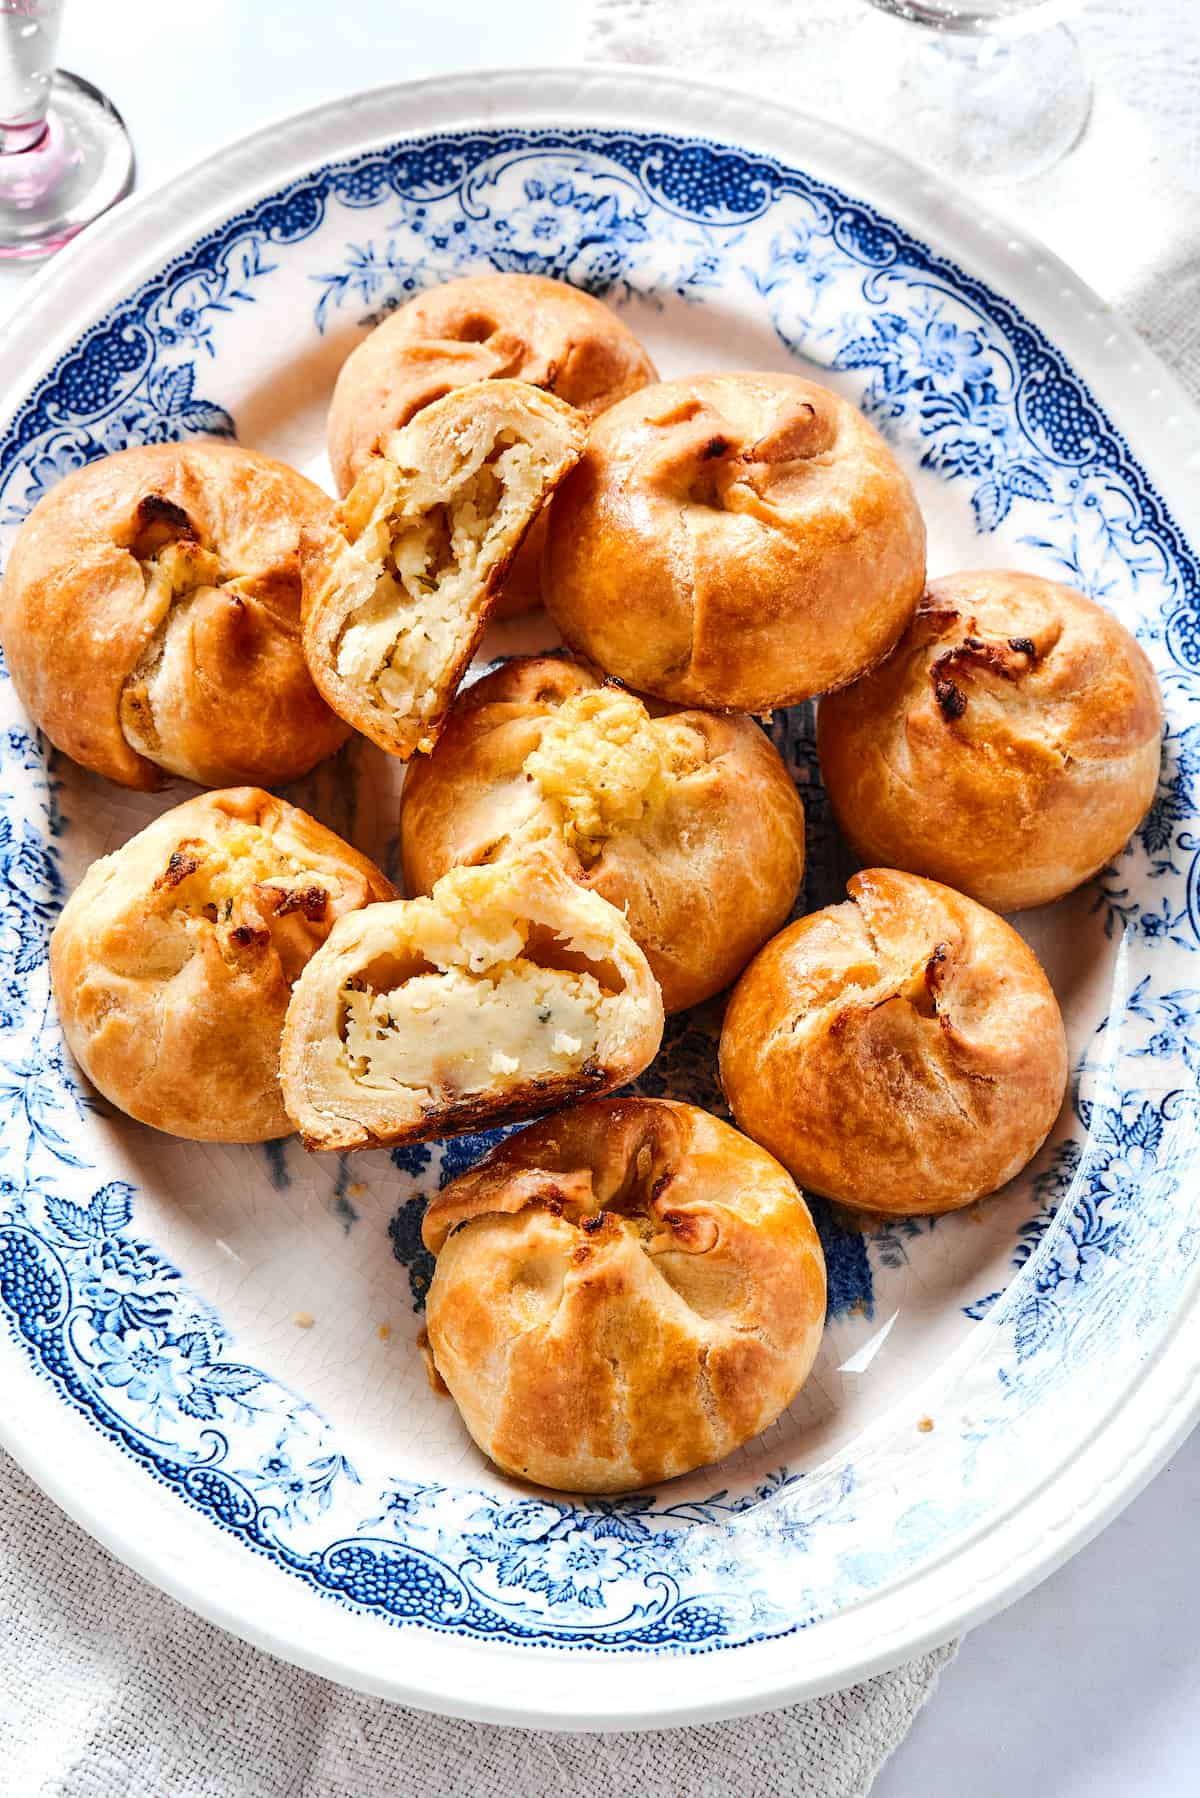 Overhead view of a plate of potato knishes, with one cut in half